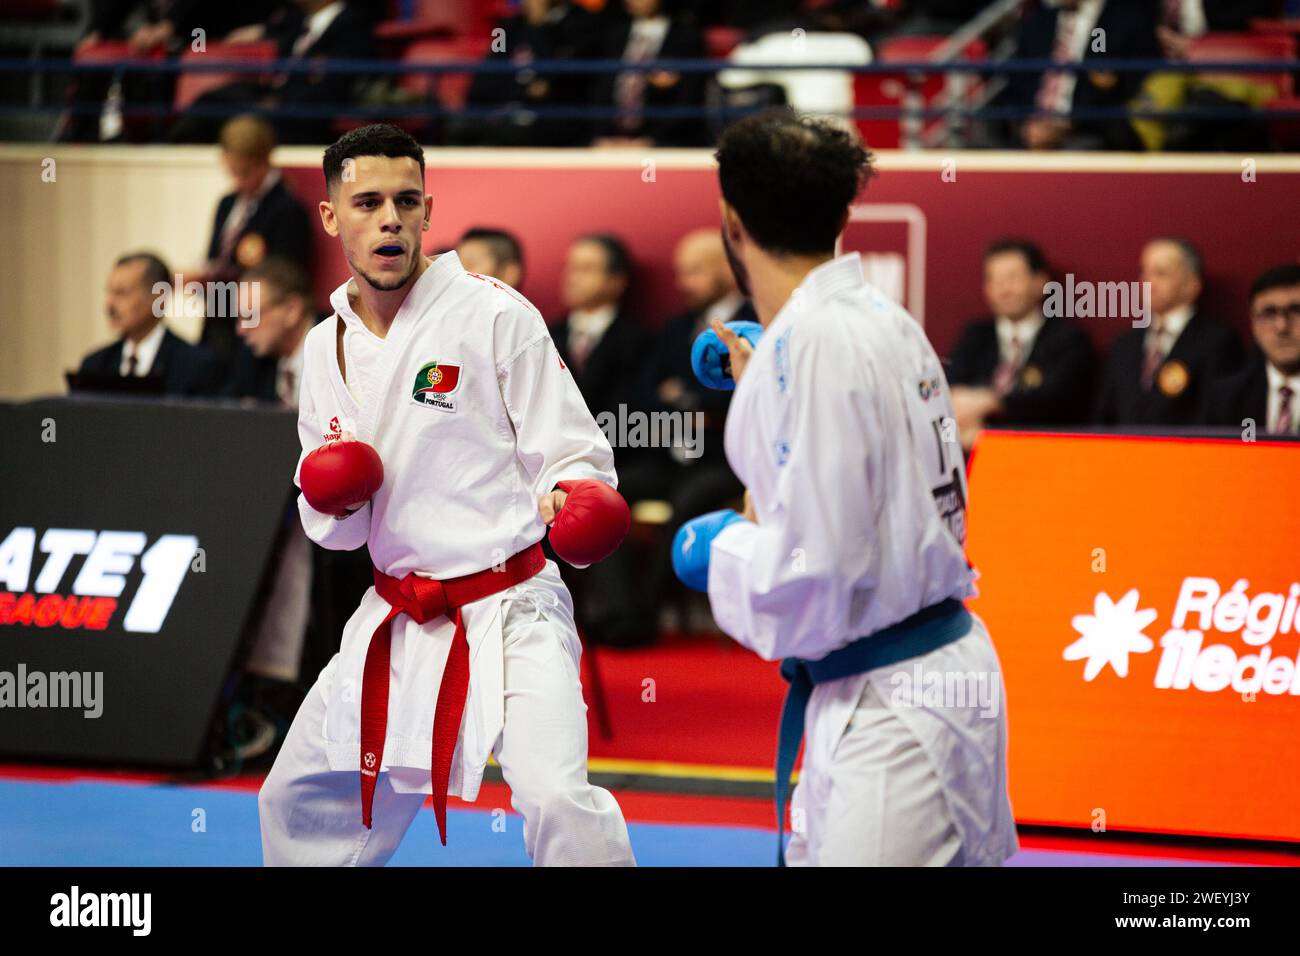 Paris, France. 26th Jan, 2024. Tiago Duarte (Red), from Portugal, and Ahmed Ezzat Mohy el Sharaby (Blue) from Italy compete during the Male Kumite 75kg category. The Paris Open Karaté 2024, organized by World Karaté Federation and French Karaté Federation, takes place from 26th to 28th January at the Pierre de Coubertin Stadium, in Paris. The first day of the competition had the Round Robin of Kumite and Kata Individual in the, categories of Male 75kg, 60kg and 84kg and Female 61kg and 50kg. (Photo by Telmo Pinto/SOPA Images/Sipa USA) Credit: Sipa USA/Alamy Live News Stock Photo